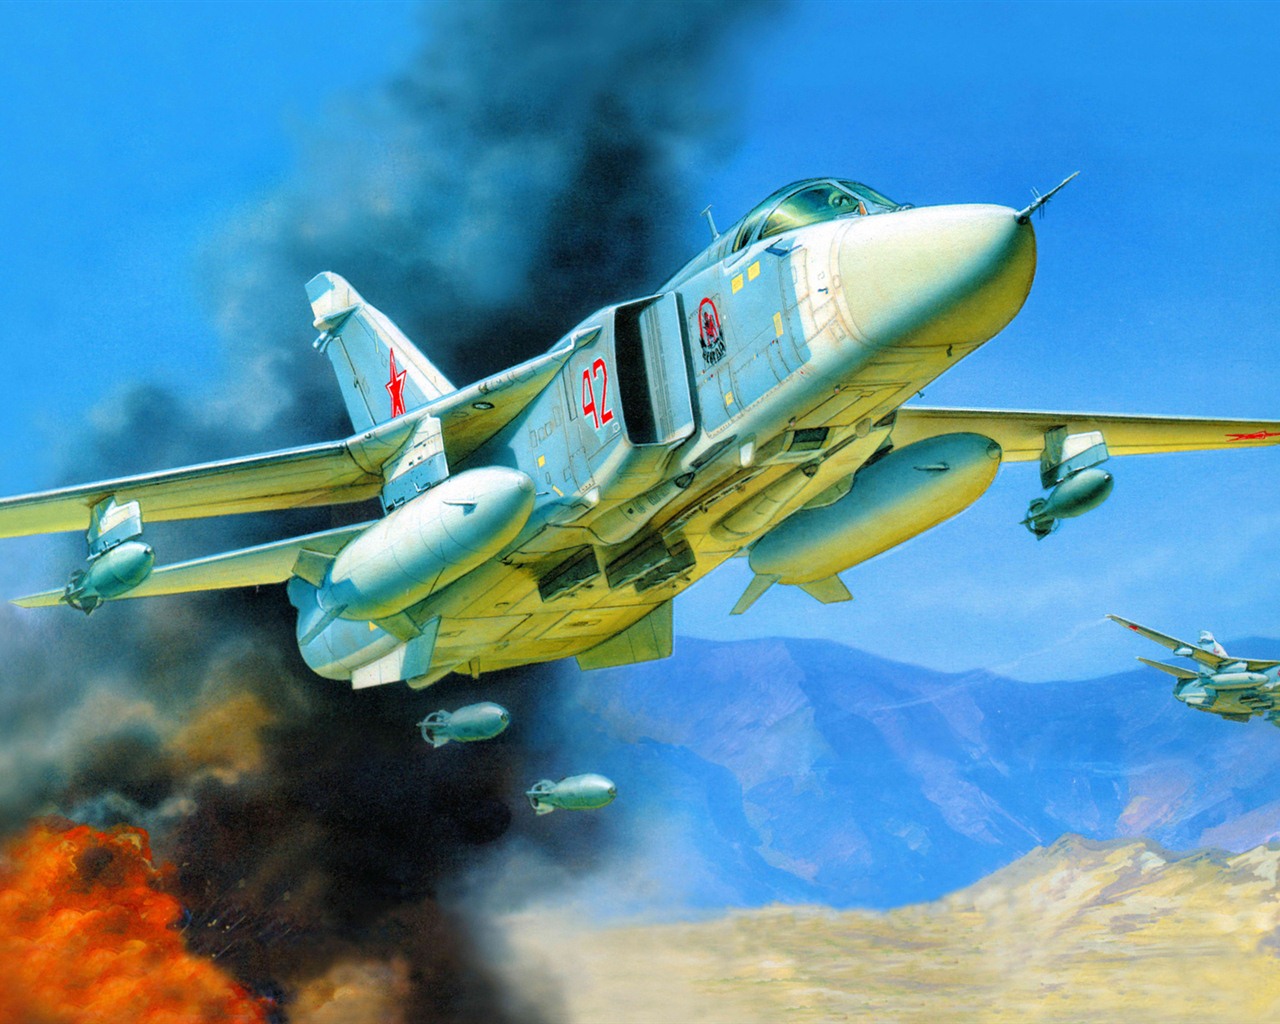 Military aircraft flight exquisite painting wallpapers #3 - 1280x1024